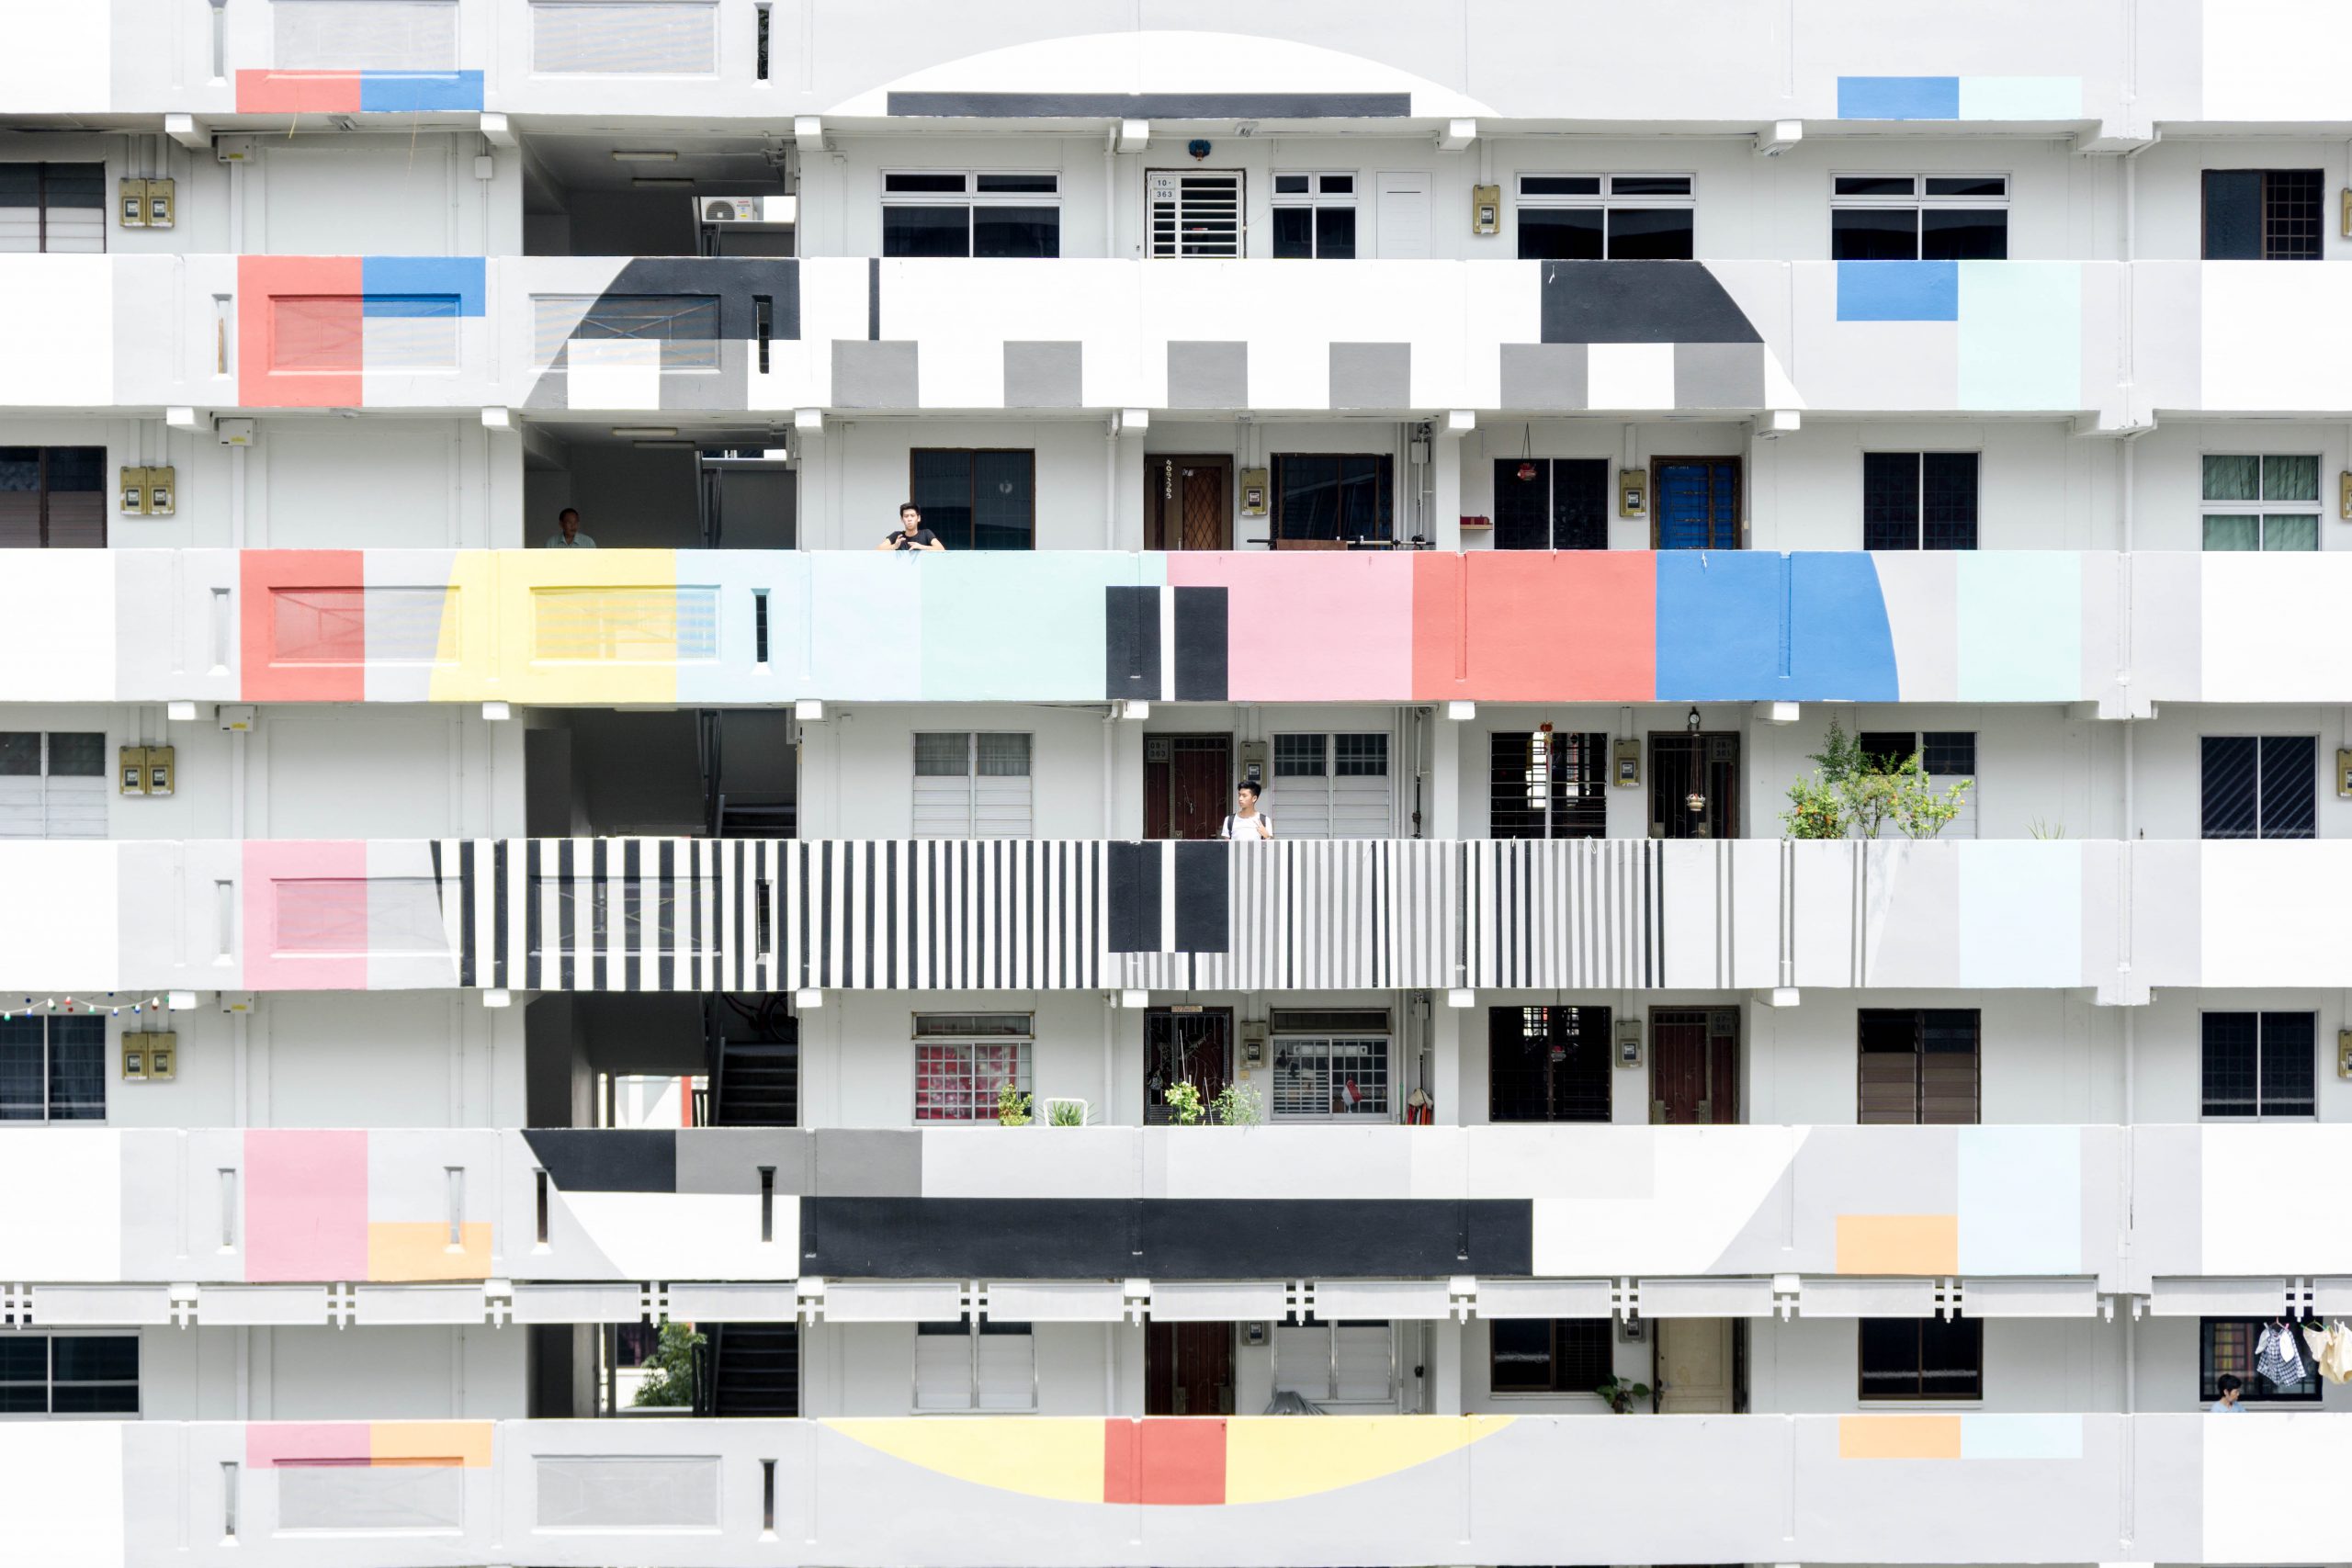 Colourful balconies in an apartment building.